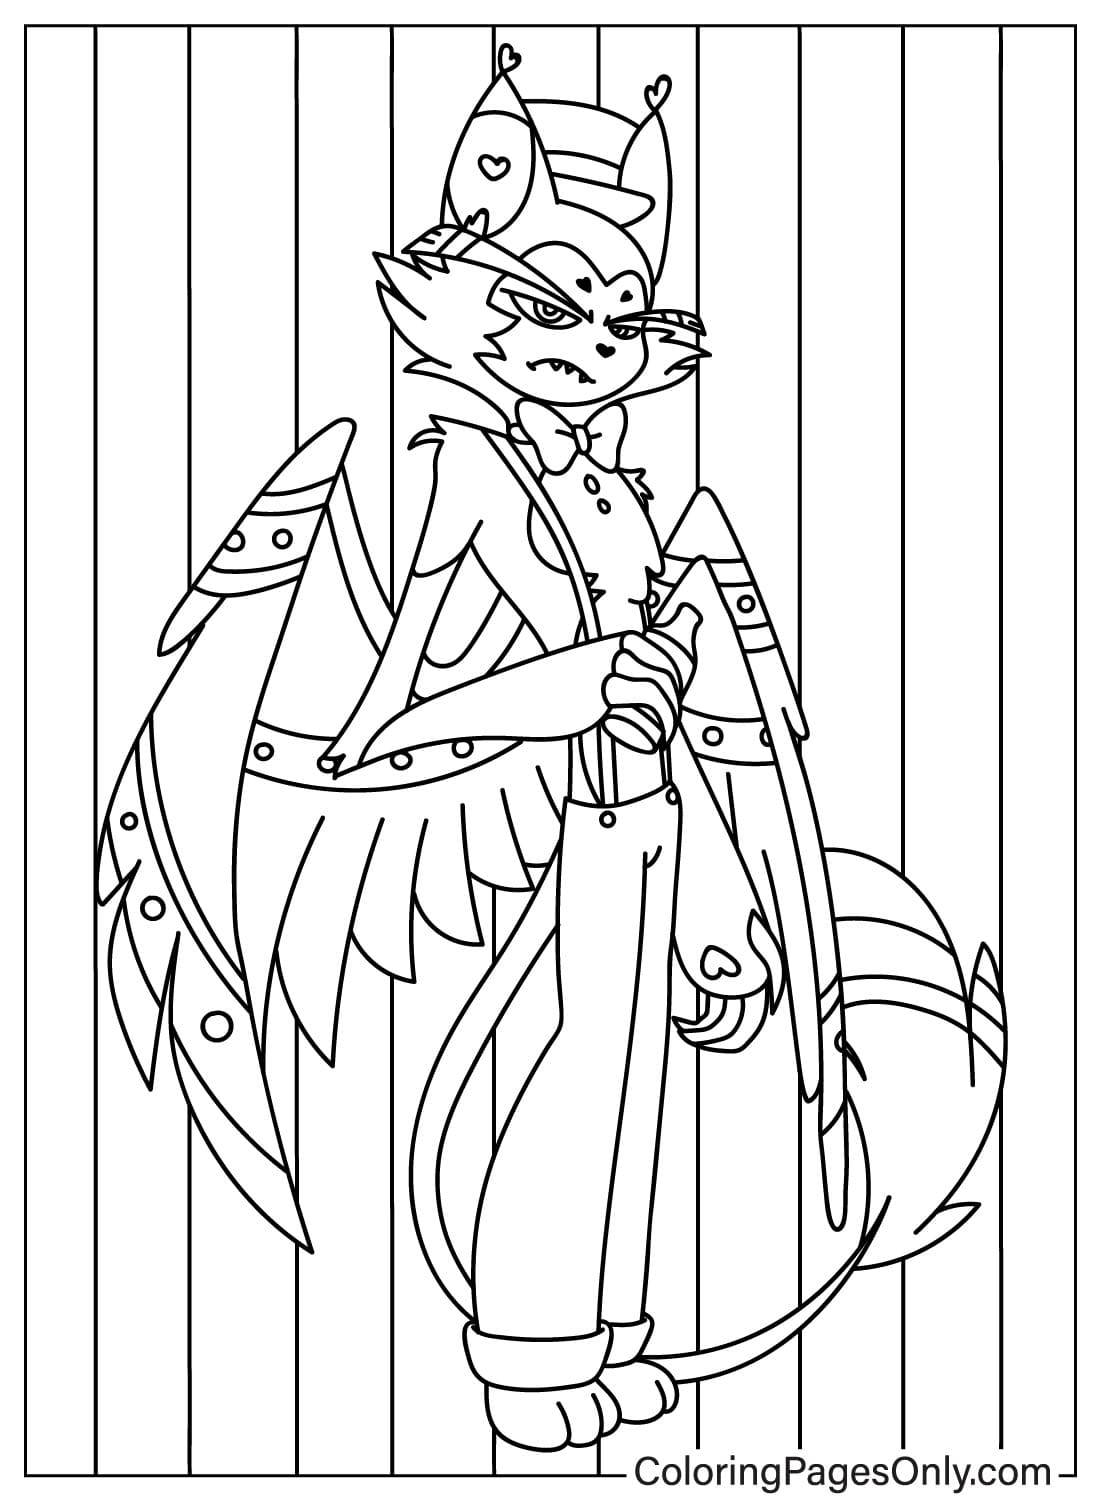 Husk Coloring Page JPG from Husk